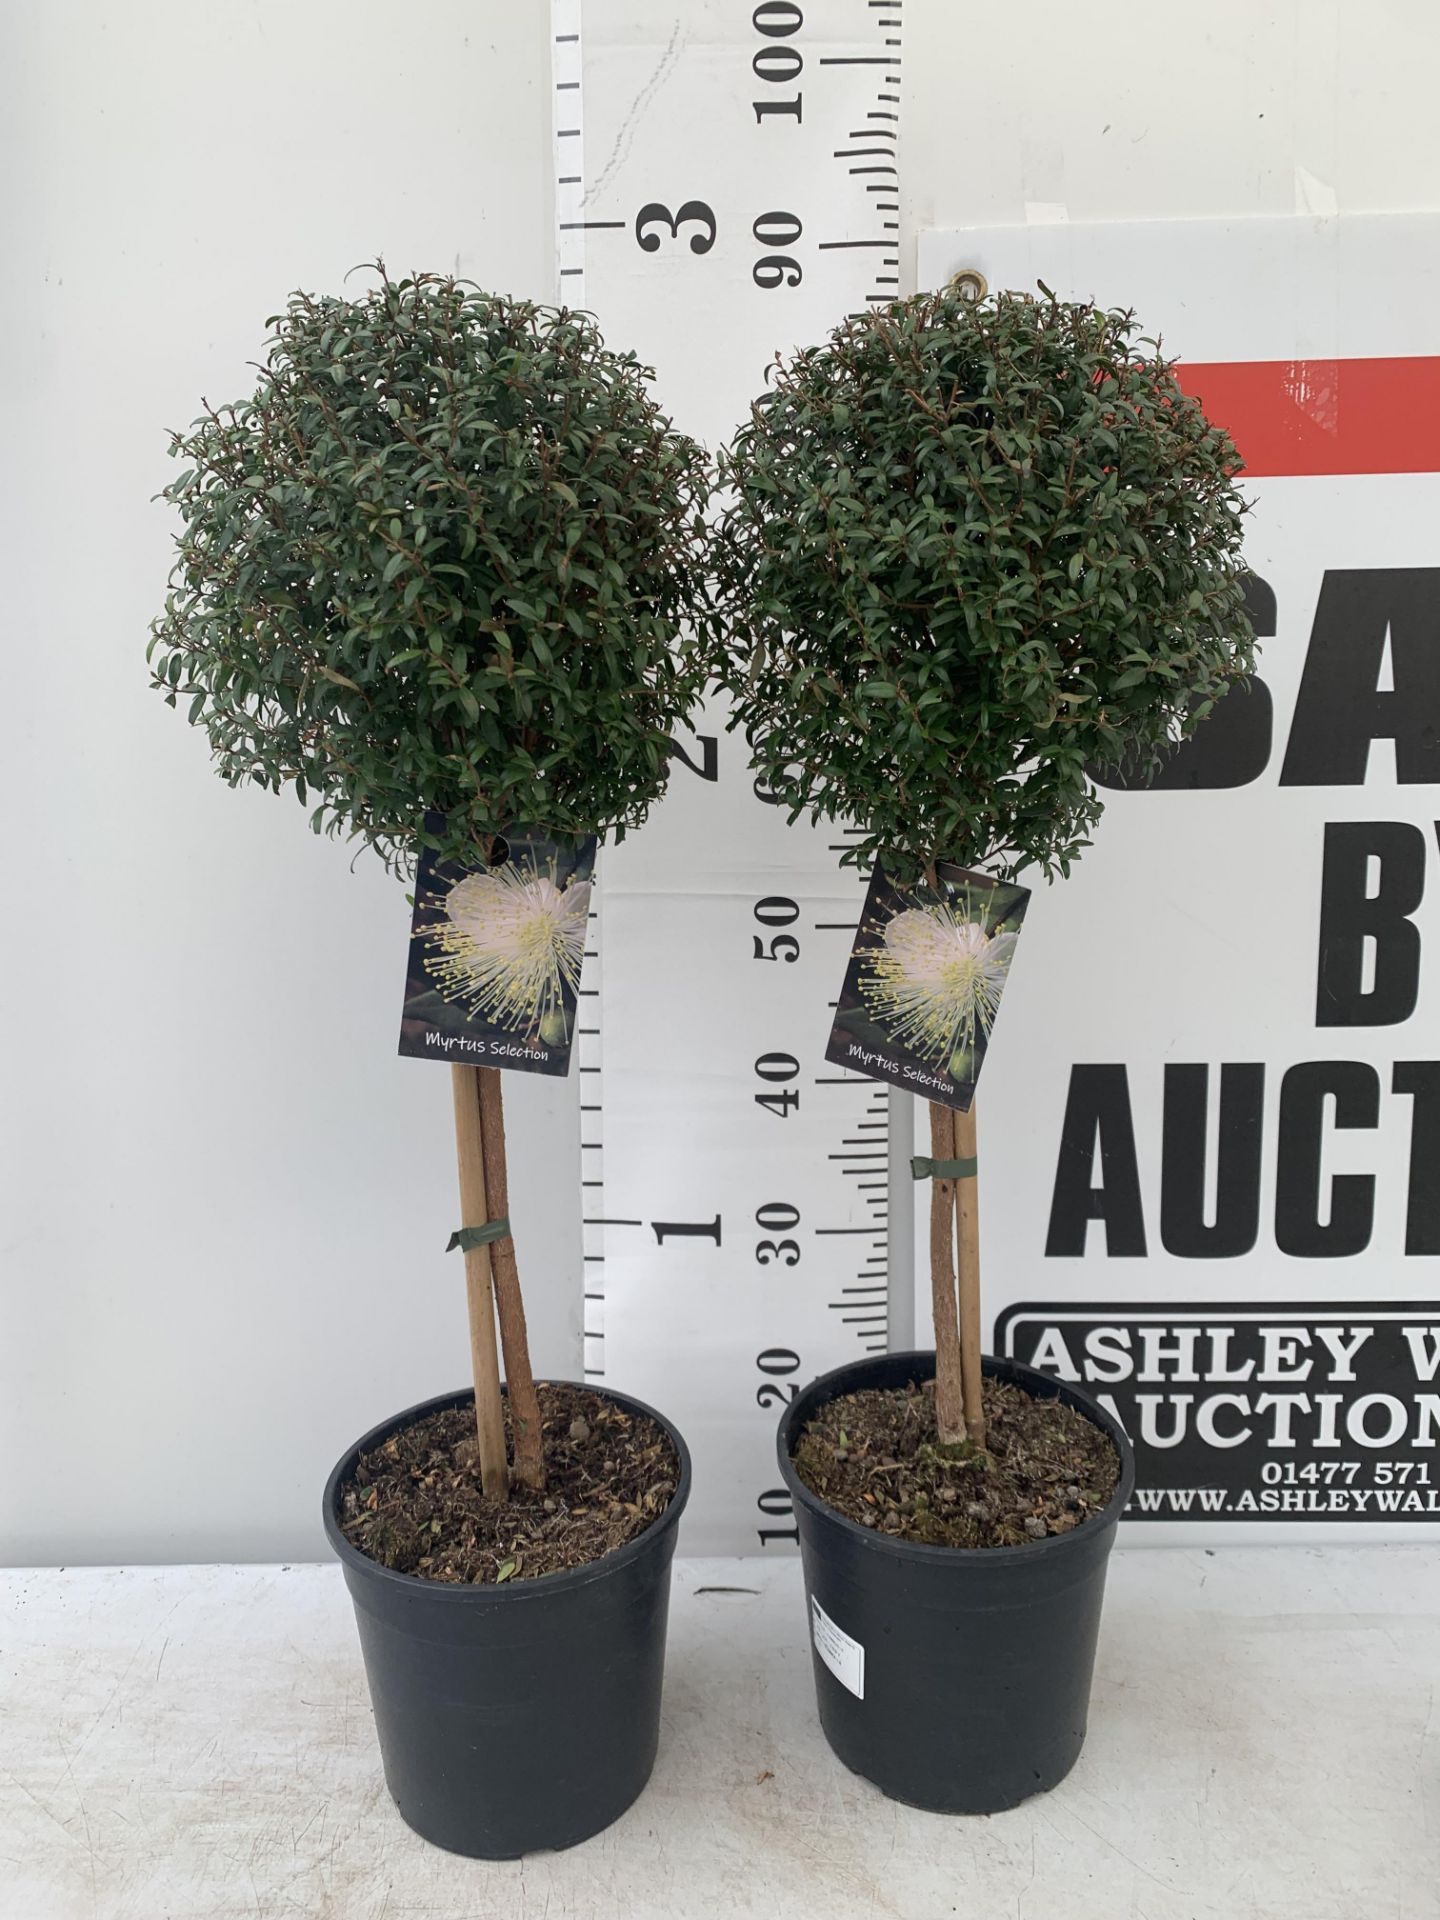 TWO MYRTUS SELECTION STANDARD TREES APPROX 85CM IN HEIGHT IN 2 LTR POTS PLUS VAT TO BE SOLD FOR